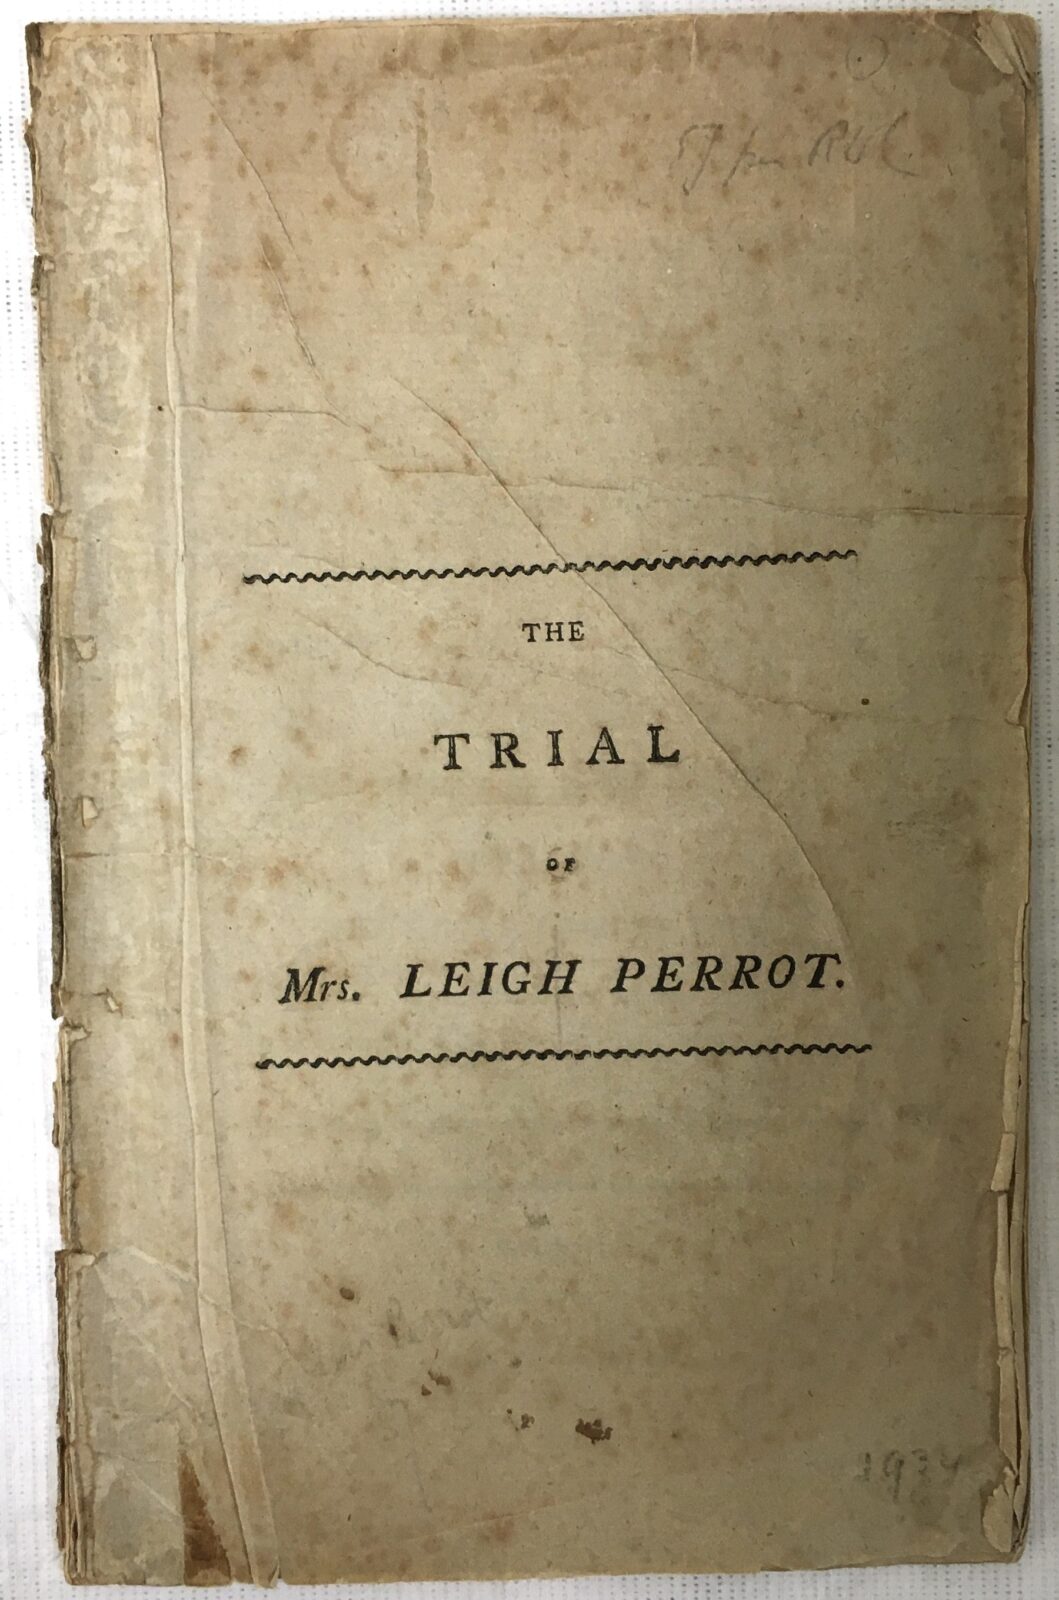 The Trial of Mrs Leigh Perrot, title page